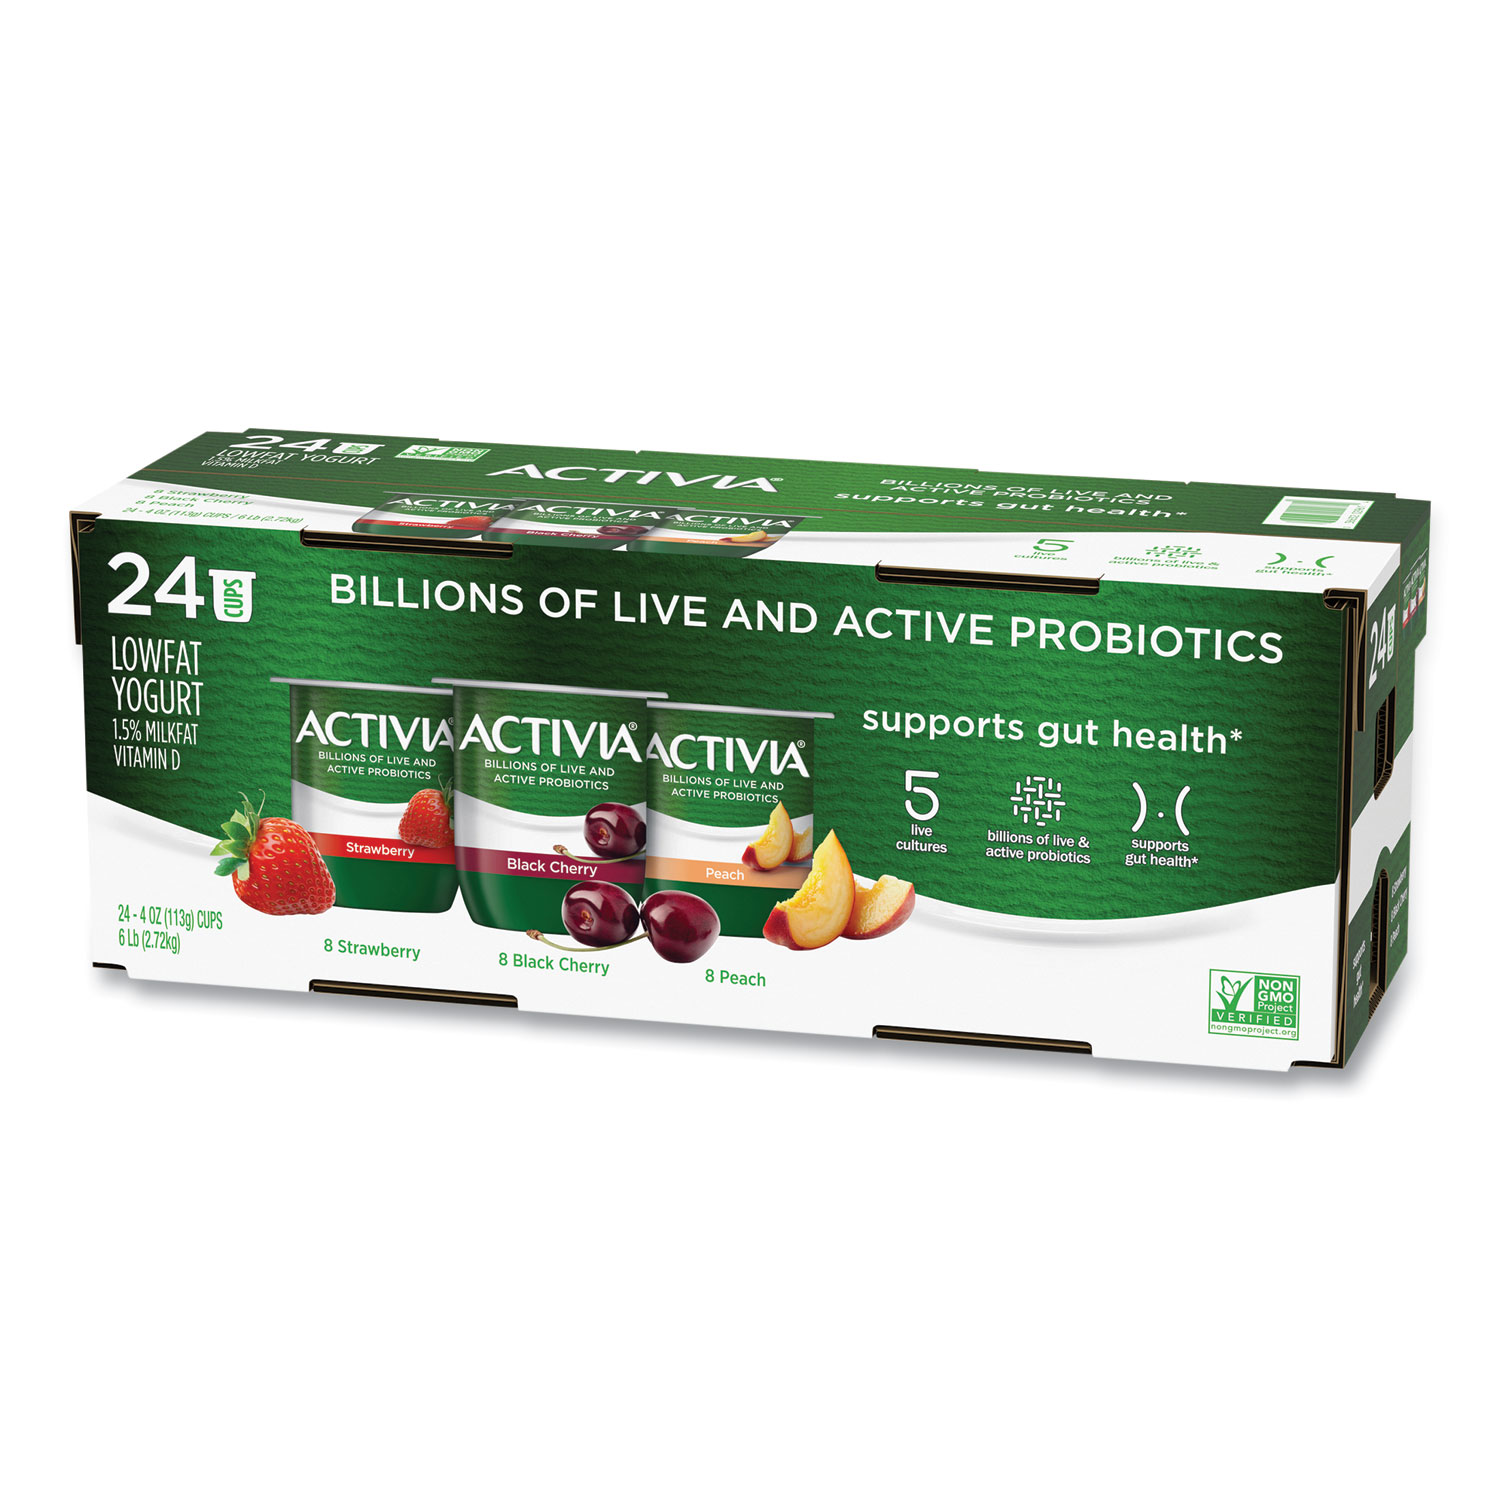  Activia 02705 Probiotic Lowfat Yogurt, 4 oz Cups, Black Cherry/Peach/Strawberry, 24/Pack, Free Delivery in 1-4 Business Days (GRR90200477) 